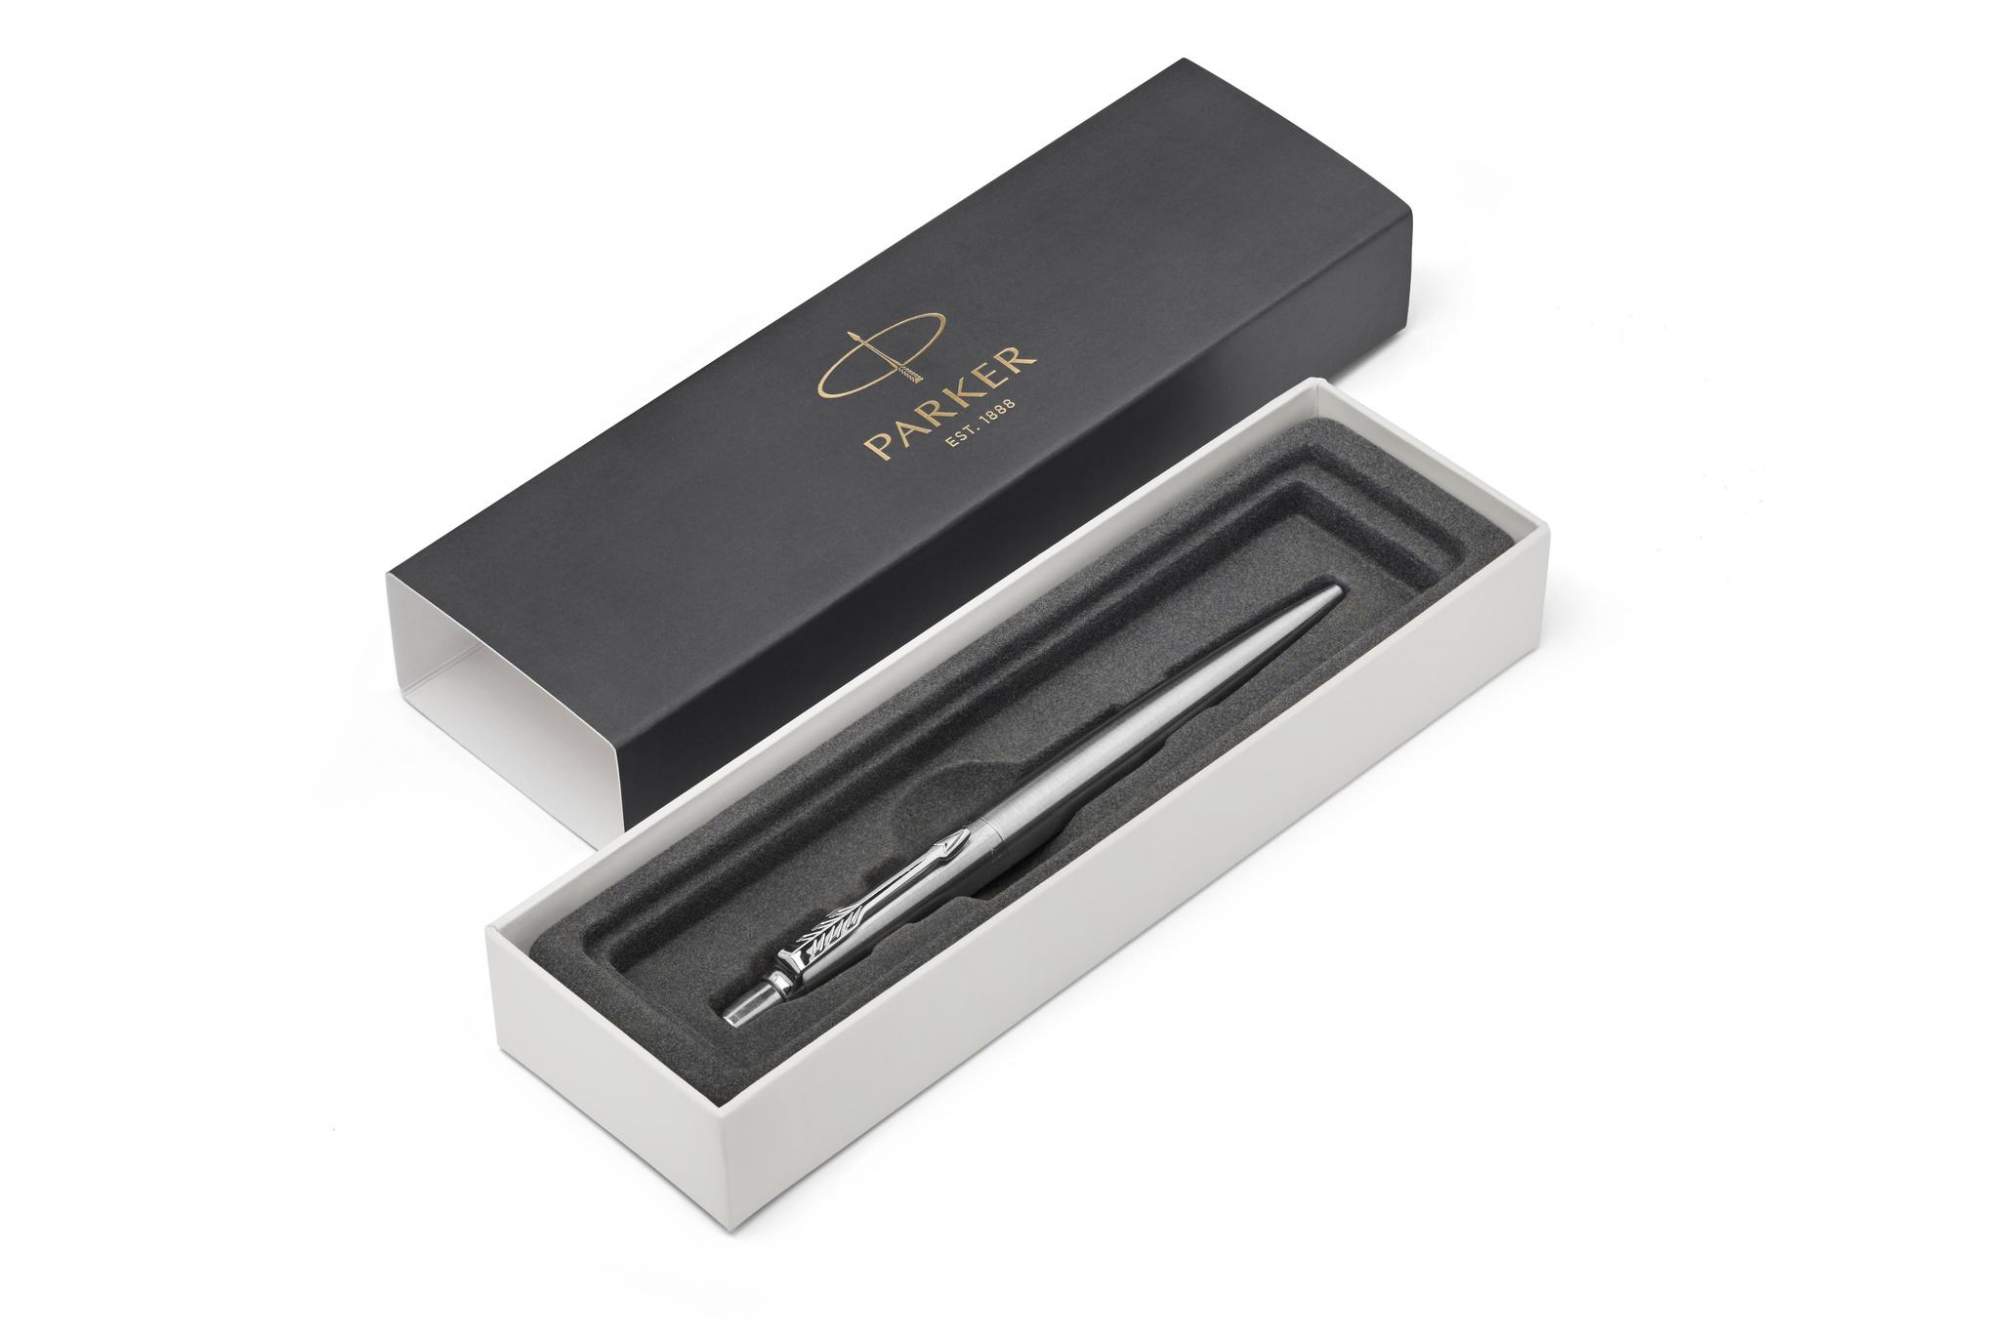 Шариковая ручка Parker Jotter Core - Stainless Steel CT M